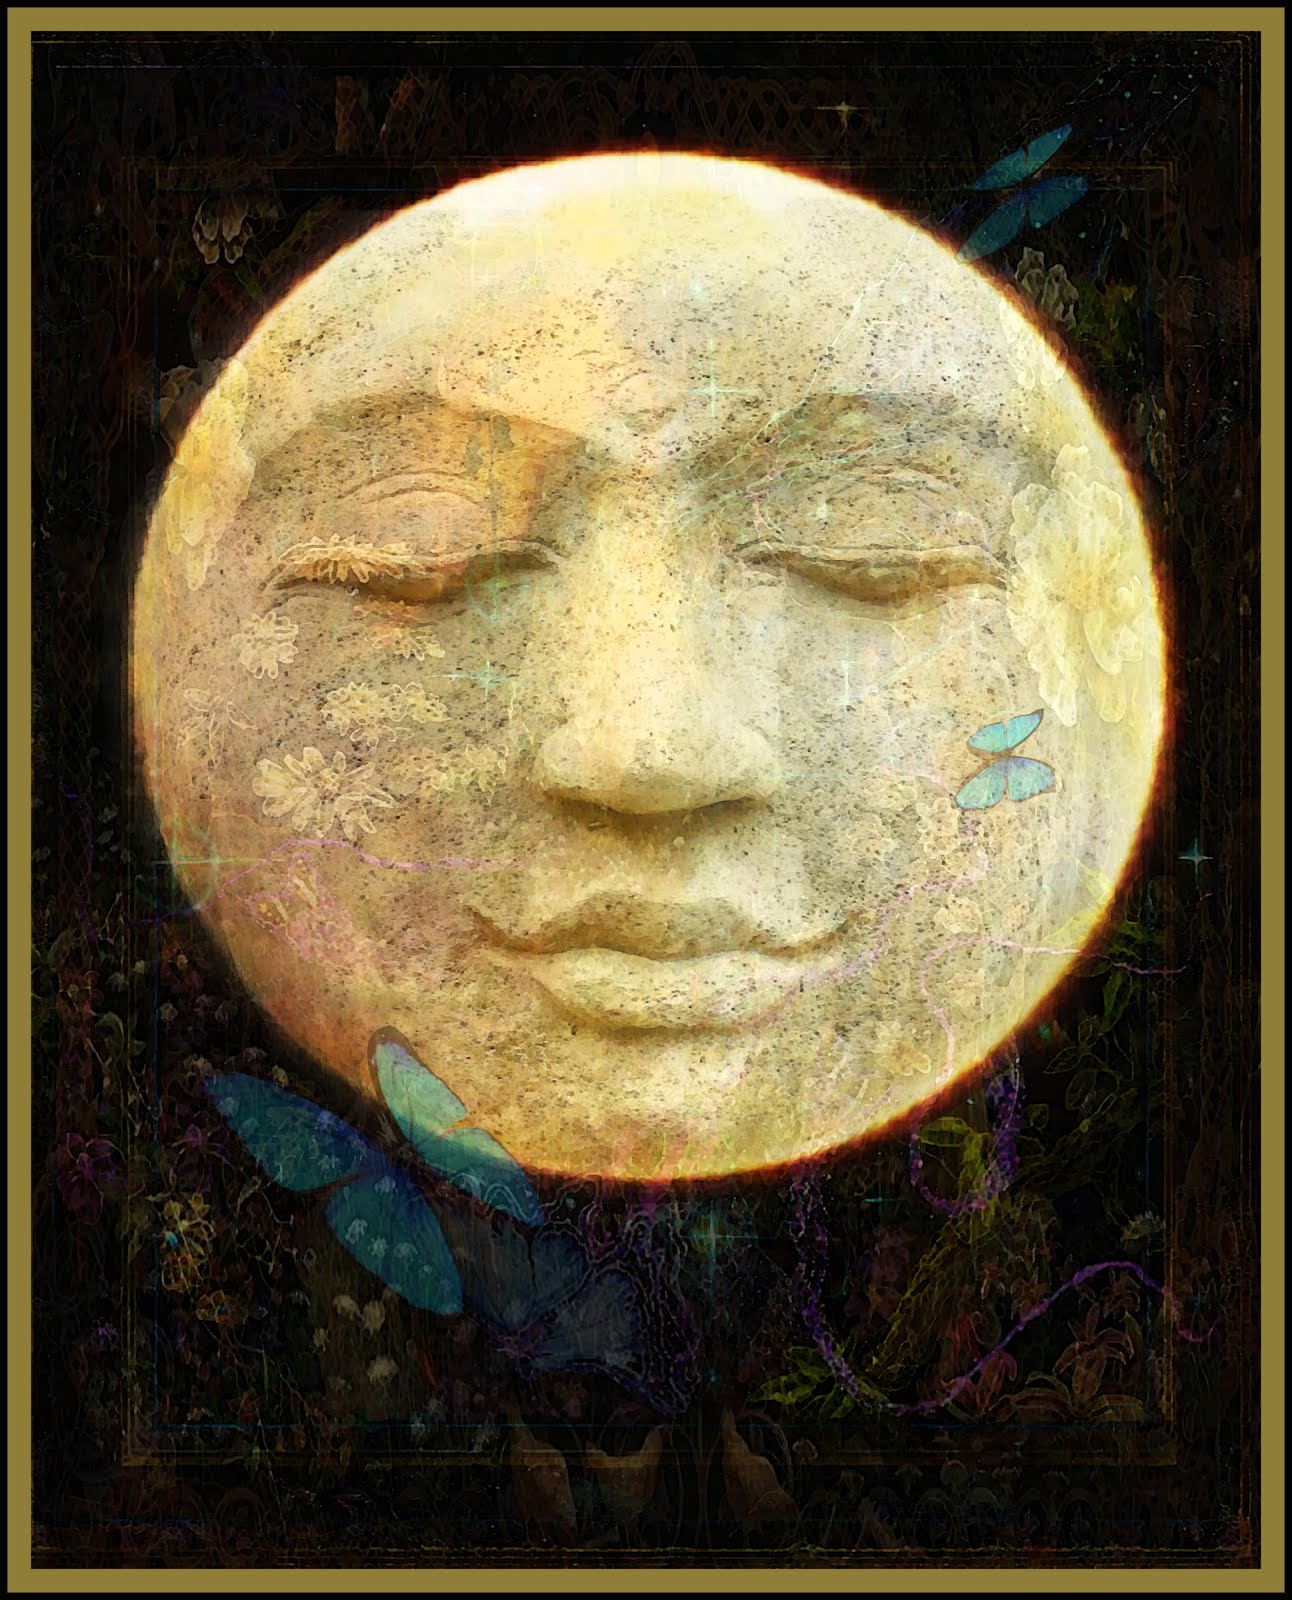 Welcome to the Moonbeam Weaver created by the light of the full moon, a time when magic abounds...